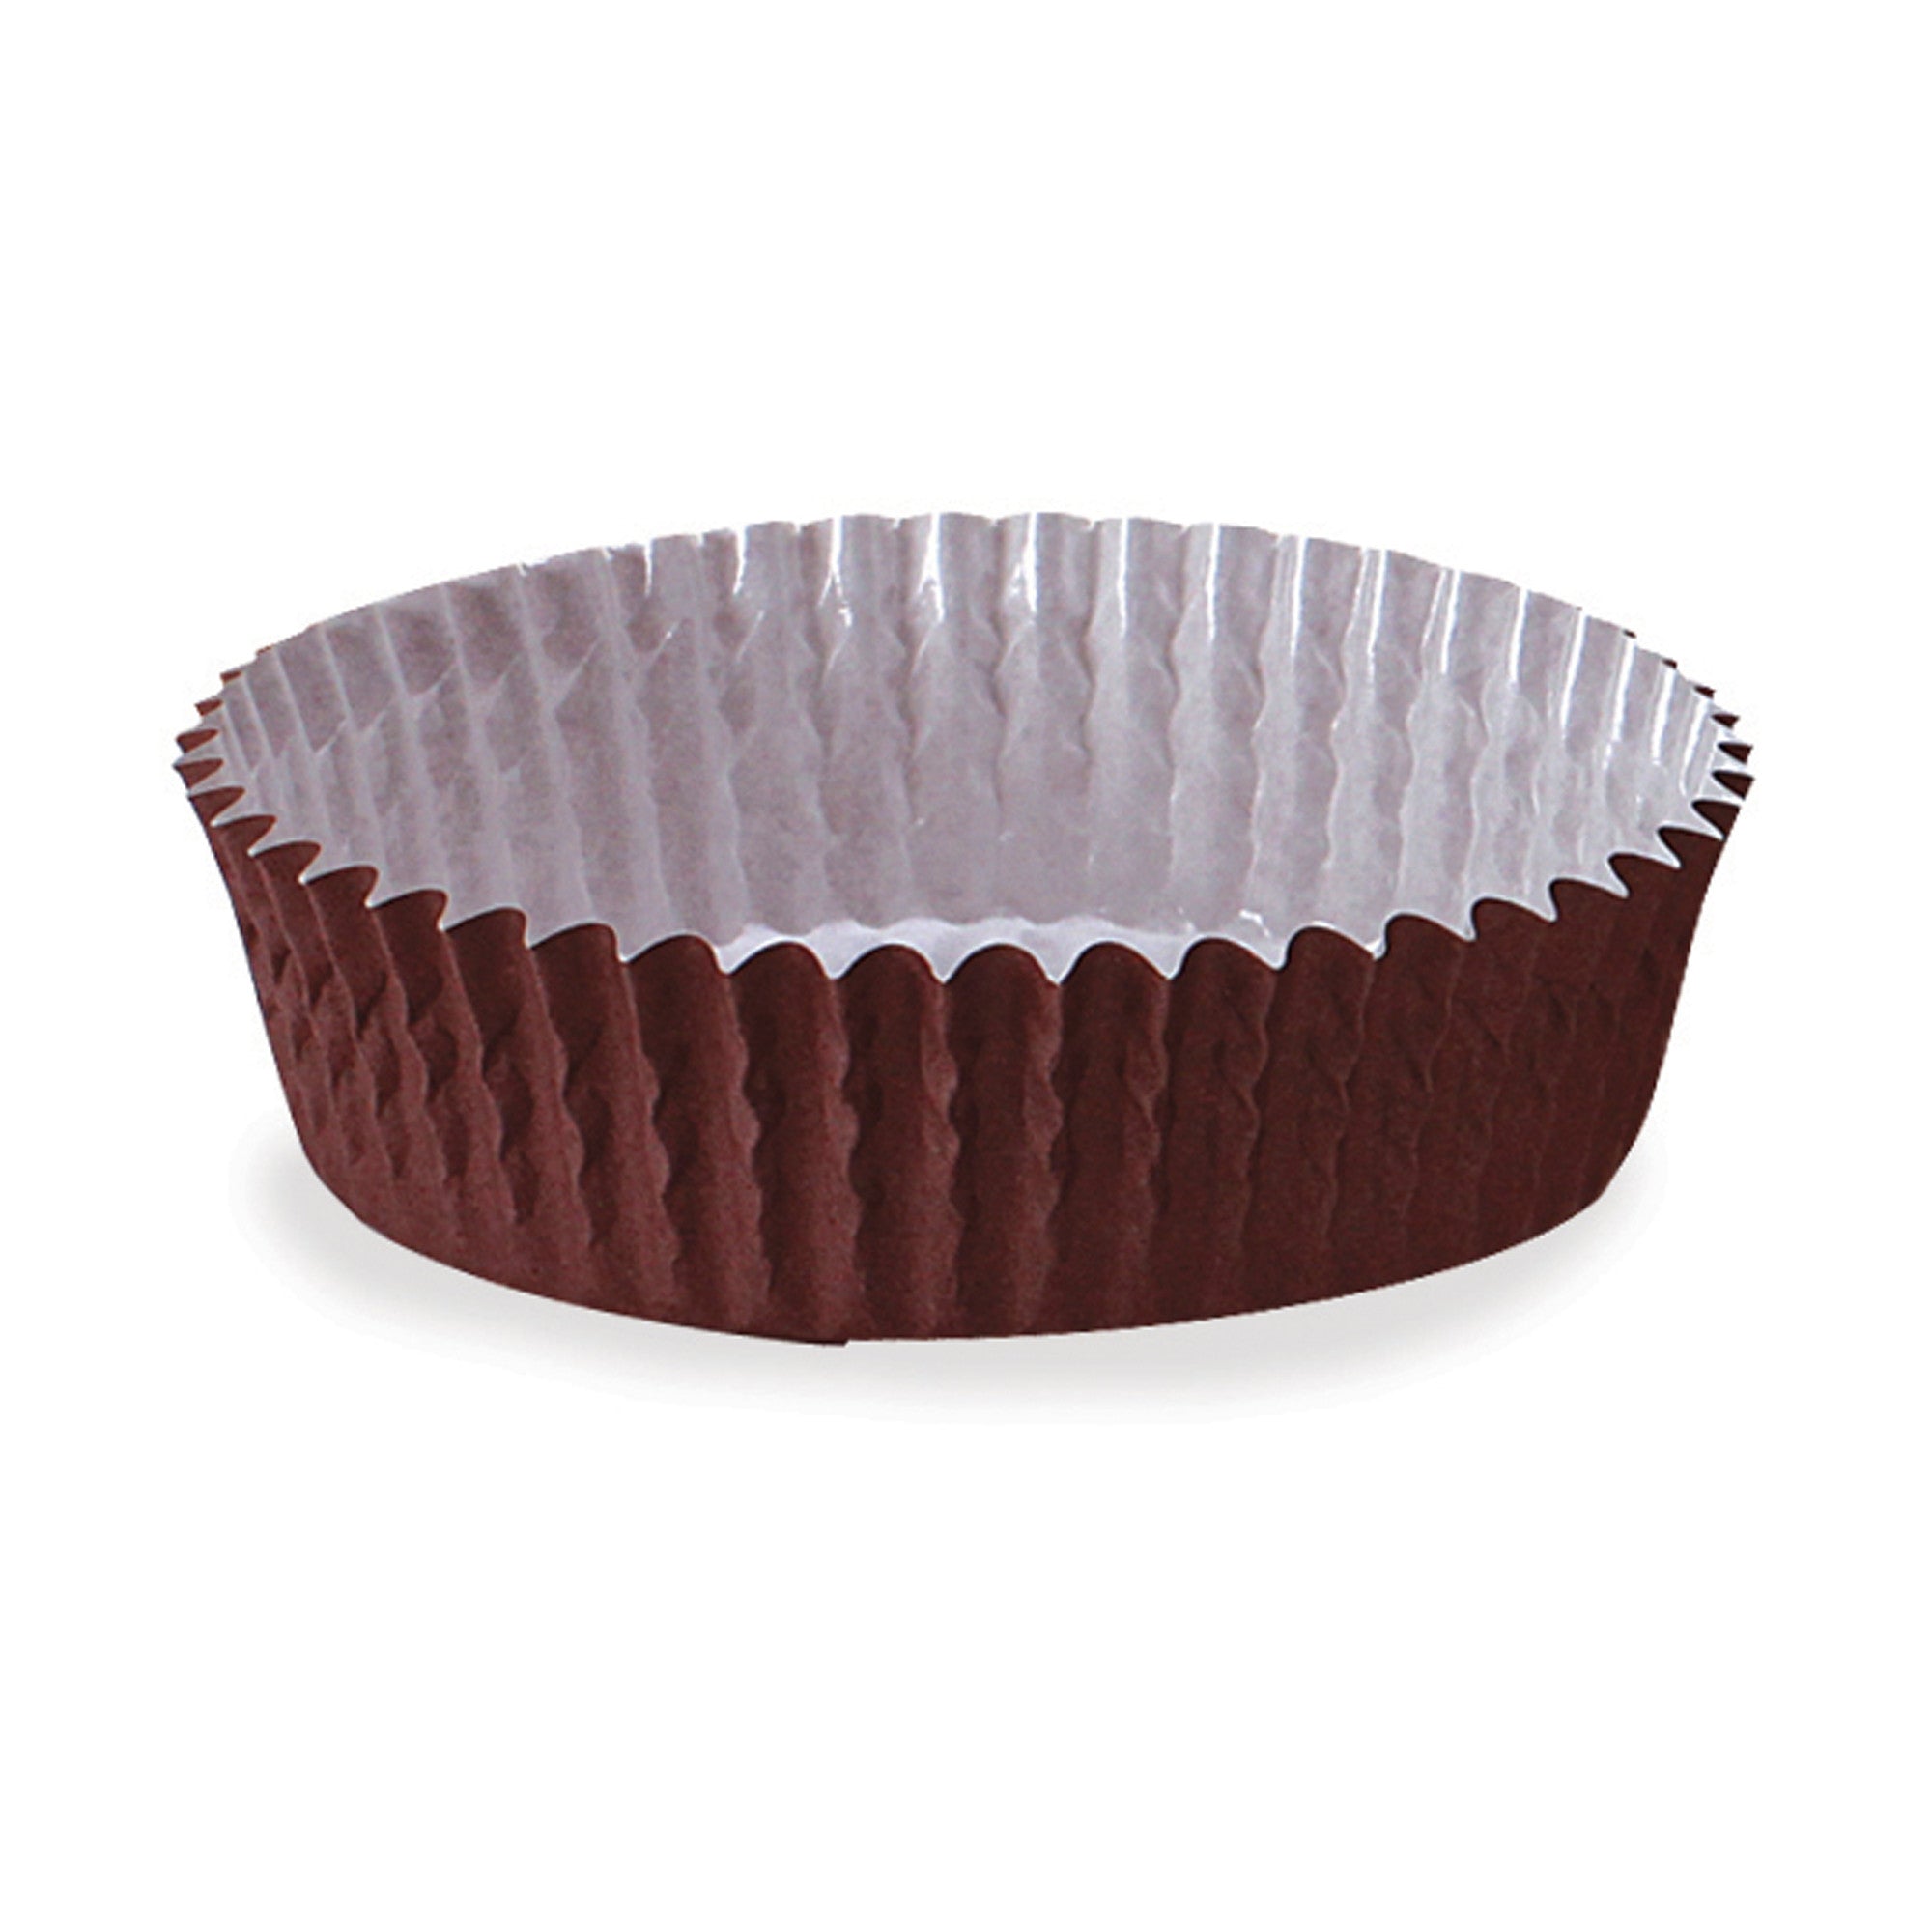 Ruffled Baking Cups, PTC07522S - Welcome Home Brands